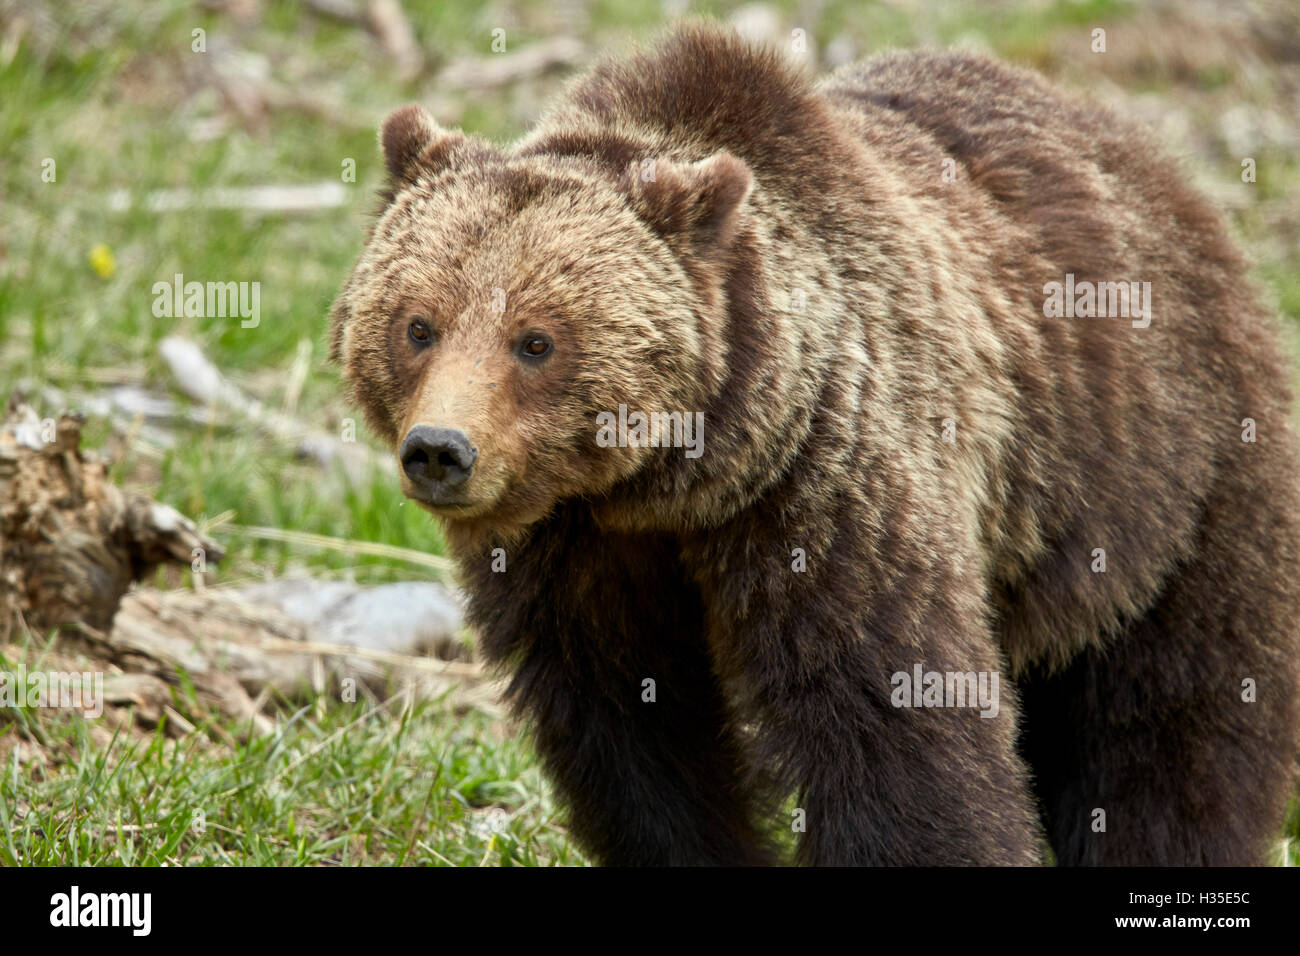 Orso grizzly (Ursus arctos horribilis) SOW, il Parco Nazionale di Yellowstone, Wyoming USA Foto Stock